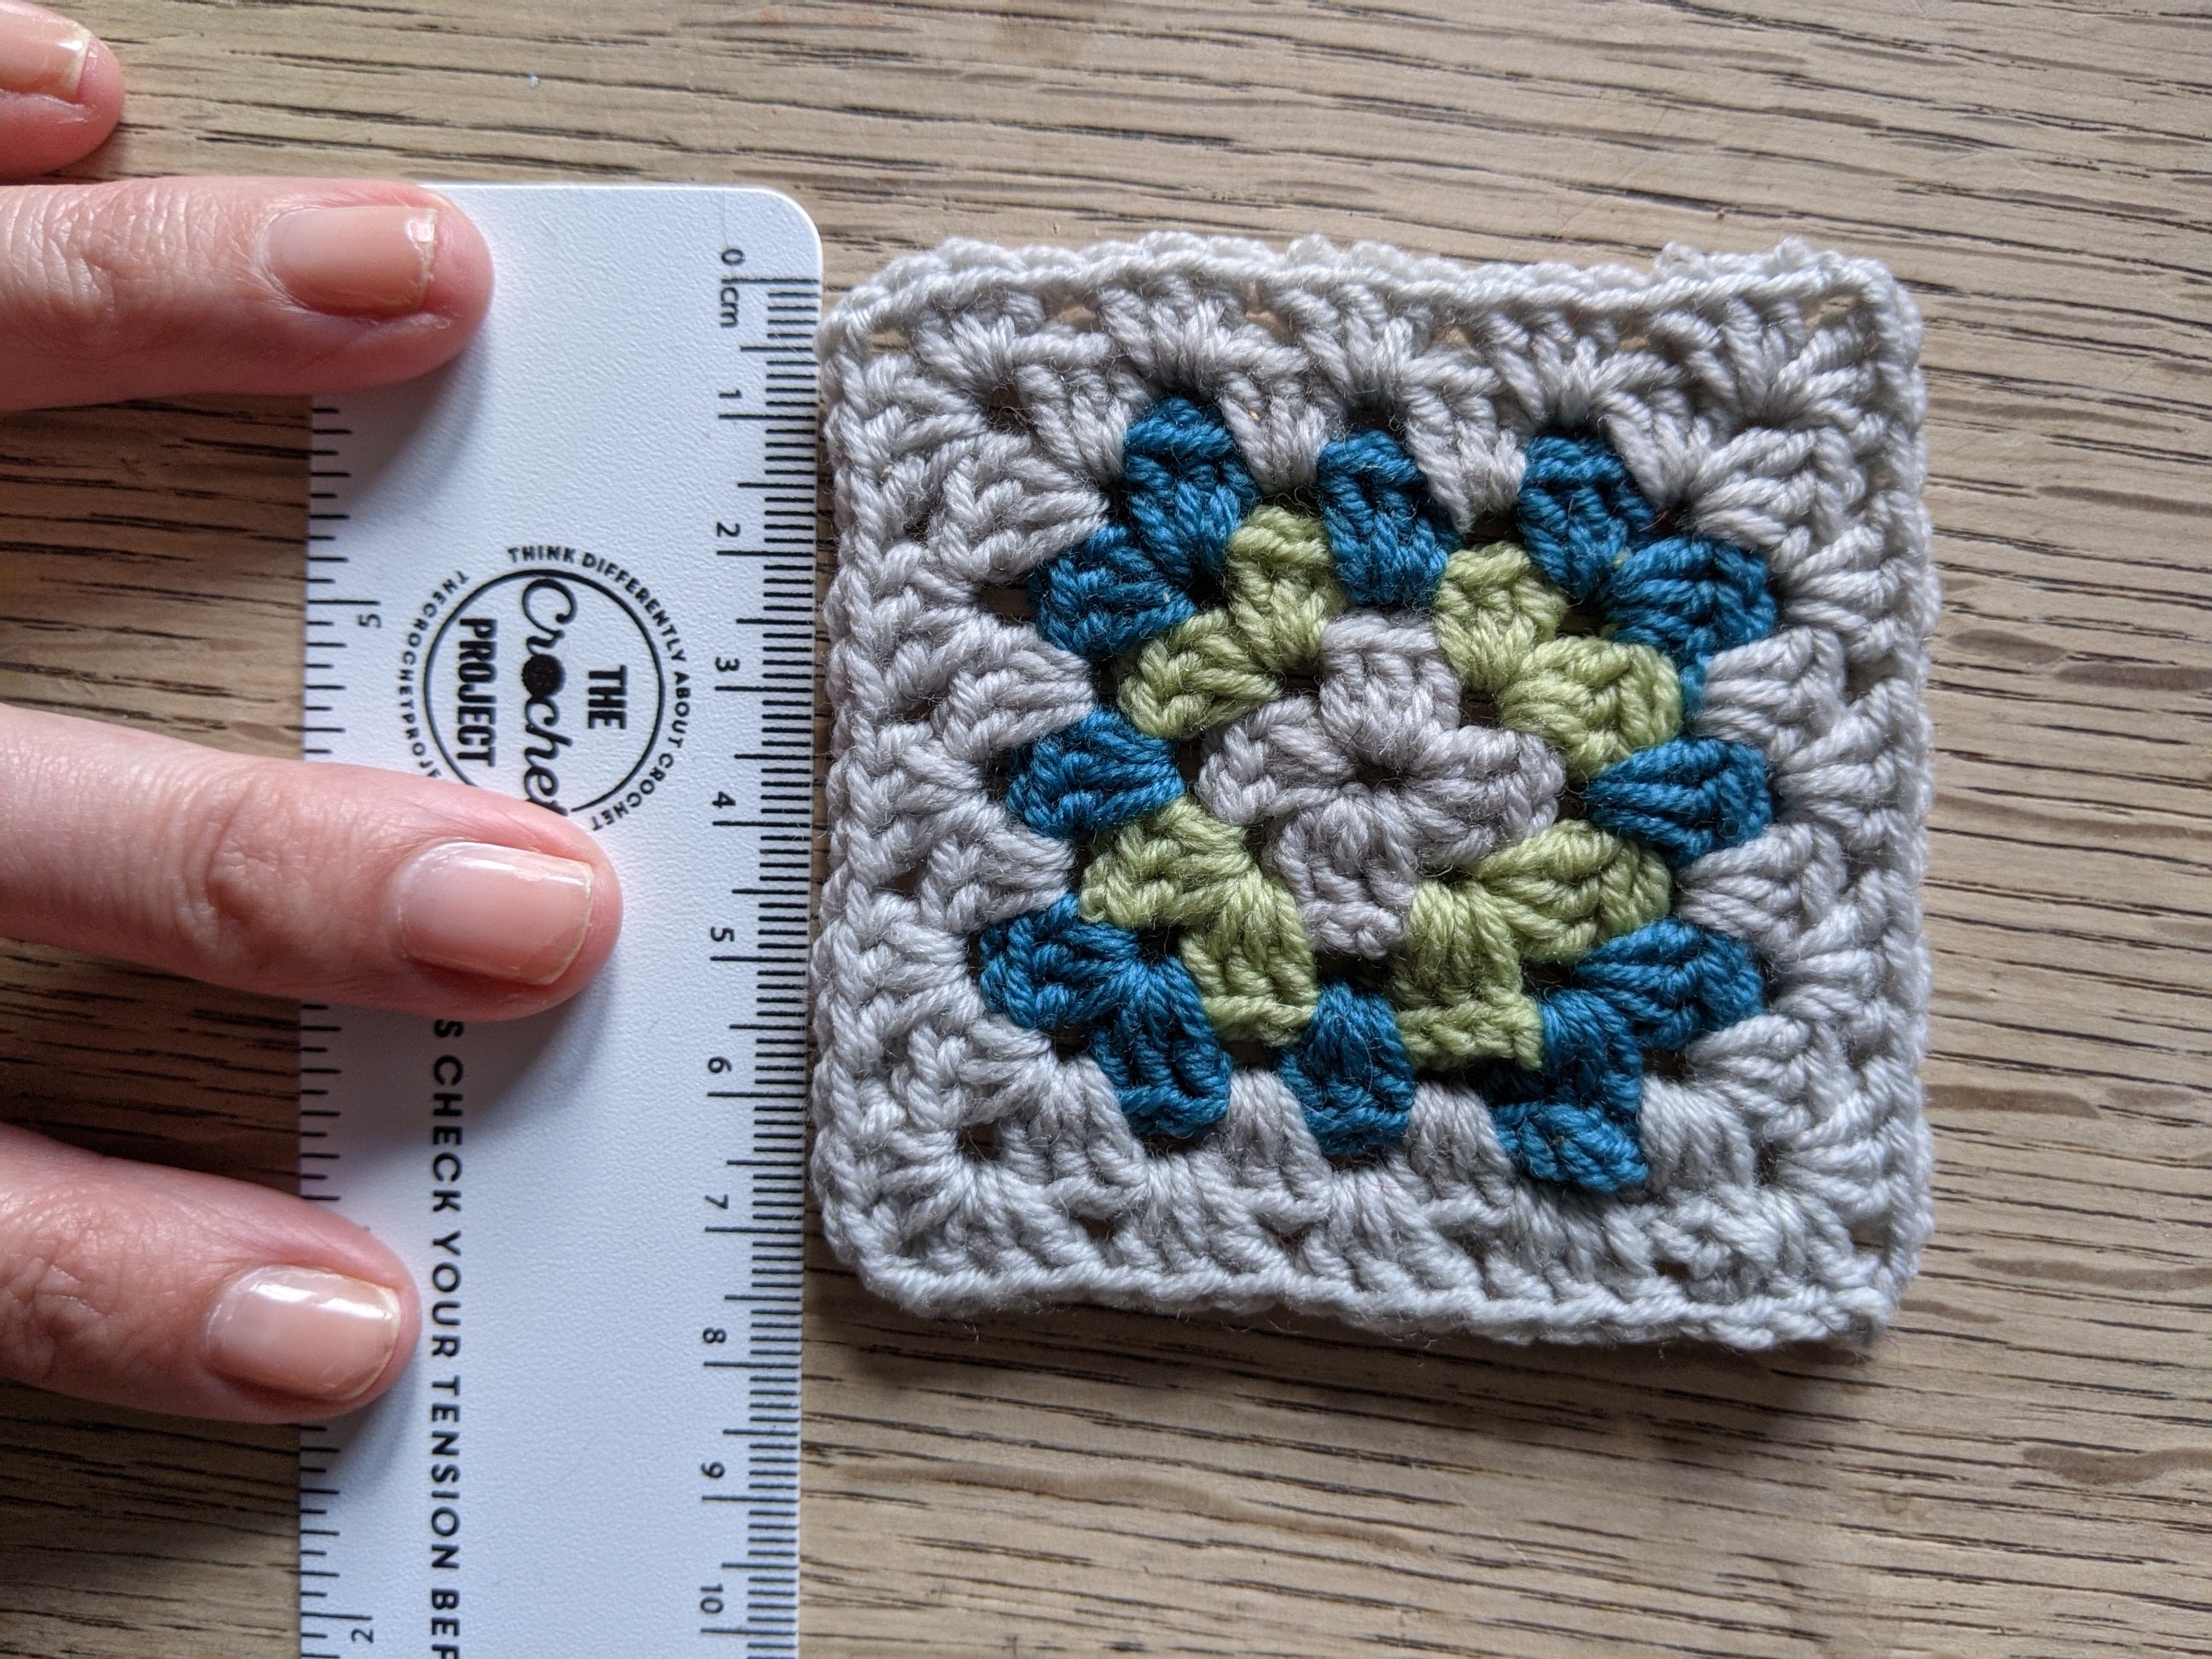 ruler and a crochet granny square